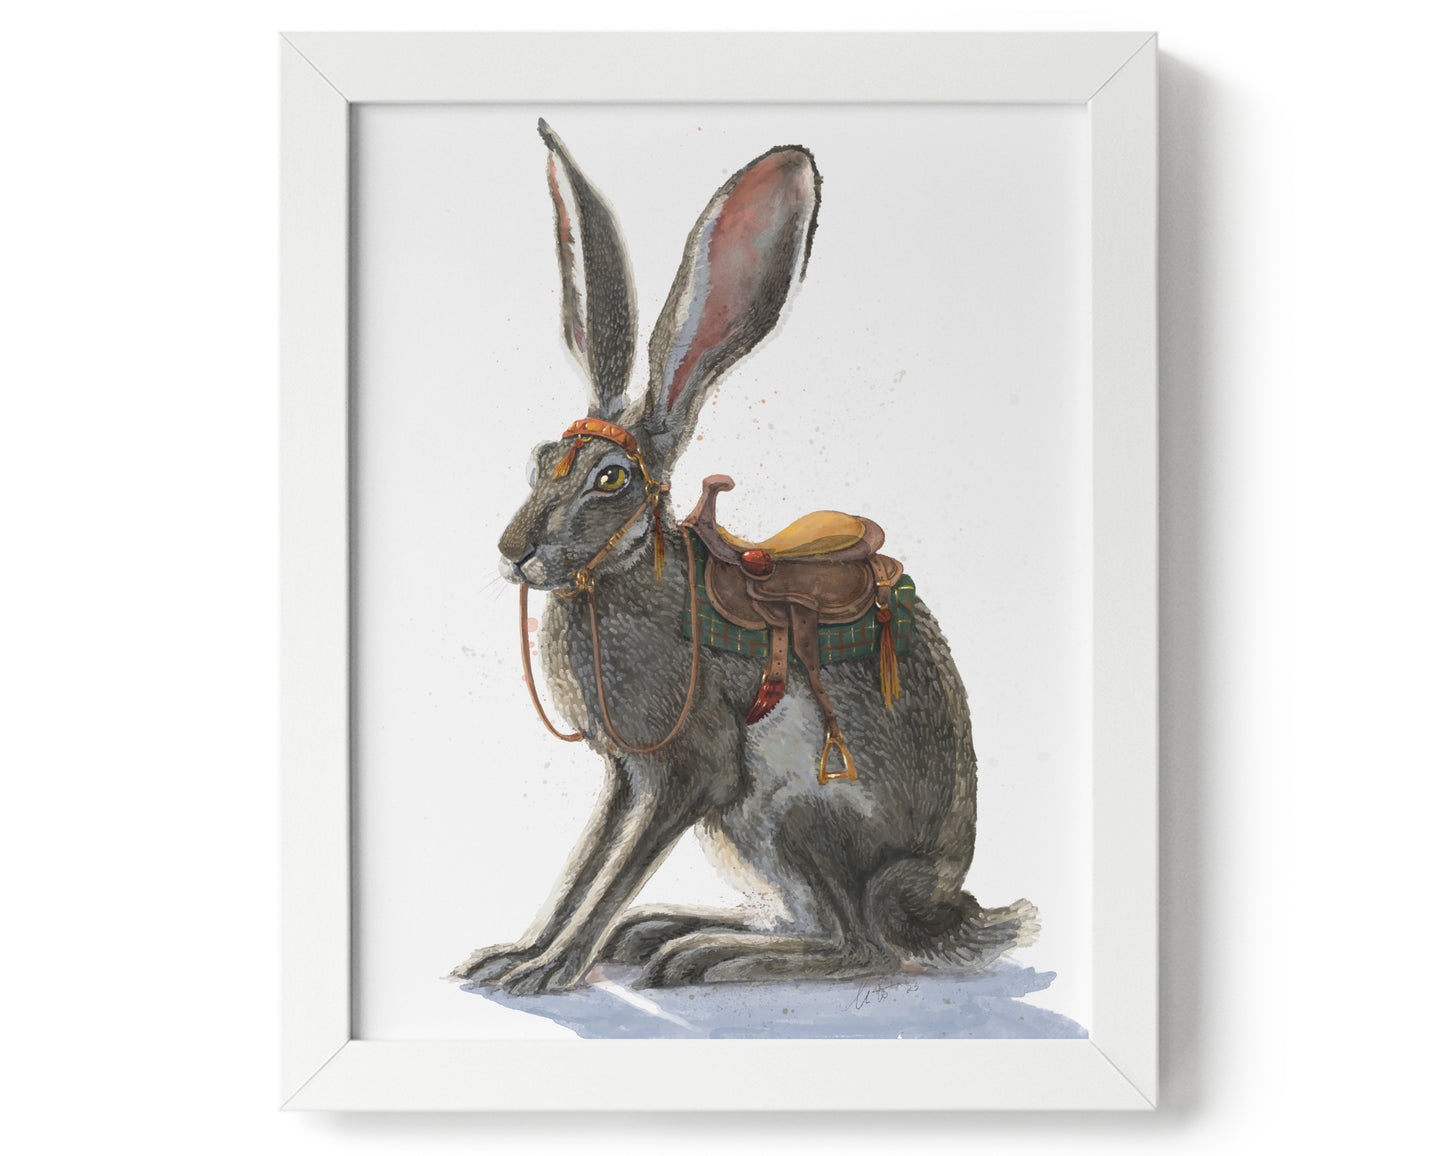 "Gallop of the Hare" by Catherine Hébert - Watercolour Hare Giclee Art Print - 8"x10" size